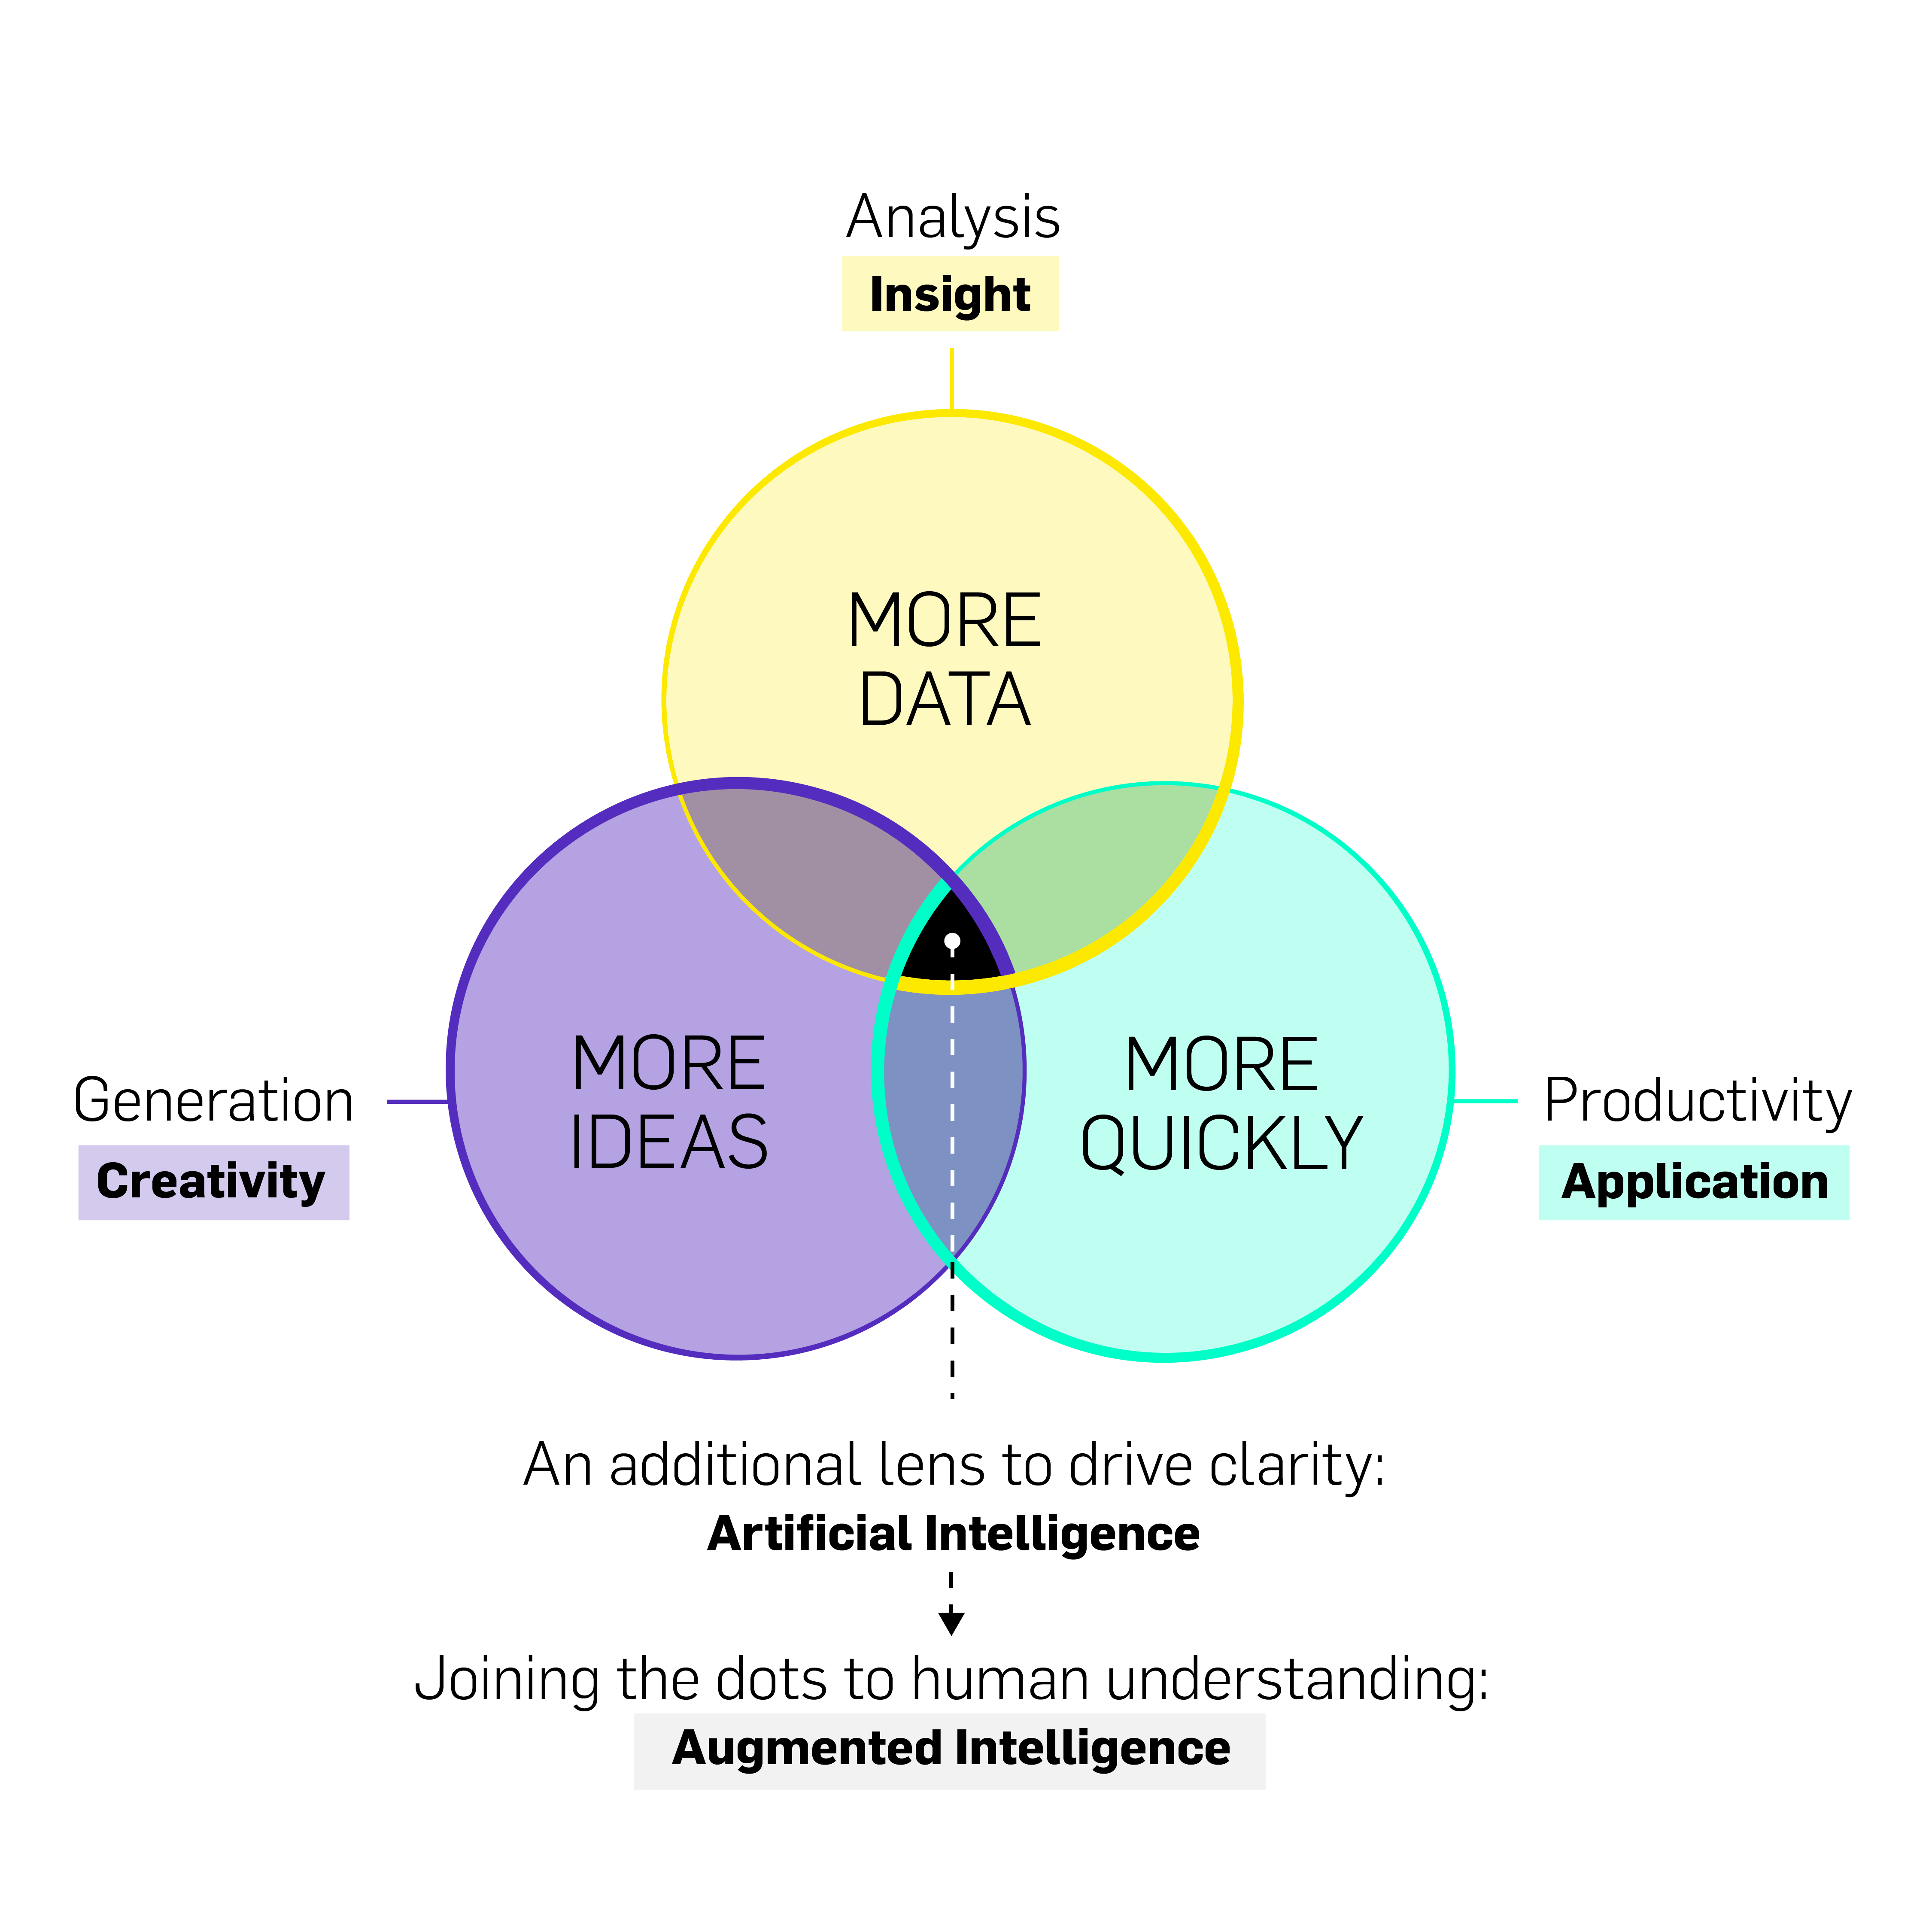 A Venn diagram with 3 intersecting circles showing how to unlock the power of AI. The purple circle reads "more ideas" (representing Generation/Creativity), the yellow circle reads "more data" (representing Analysis/Insight), and the teal circle reads "more quickly" (representing Productivity/Application). A dotted line drops from the intersection point to the bottom of the diagram, reading "An additional lens to drive clarity: Artificial Intelligence" and then "Joining the dots to human understanding: Augmented Intelligence."